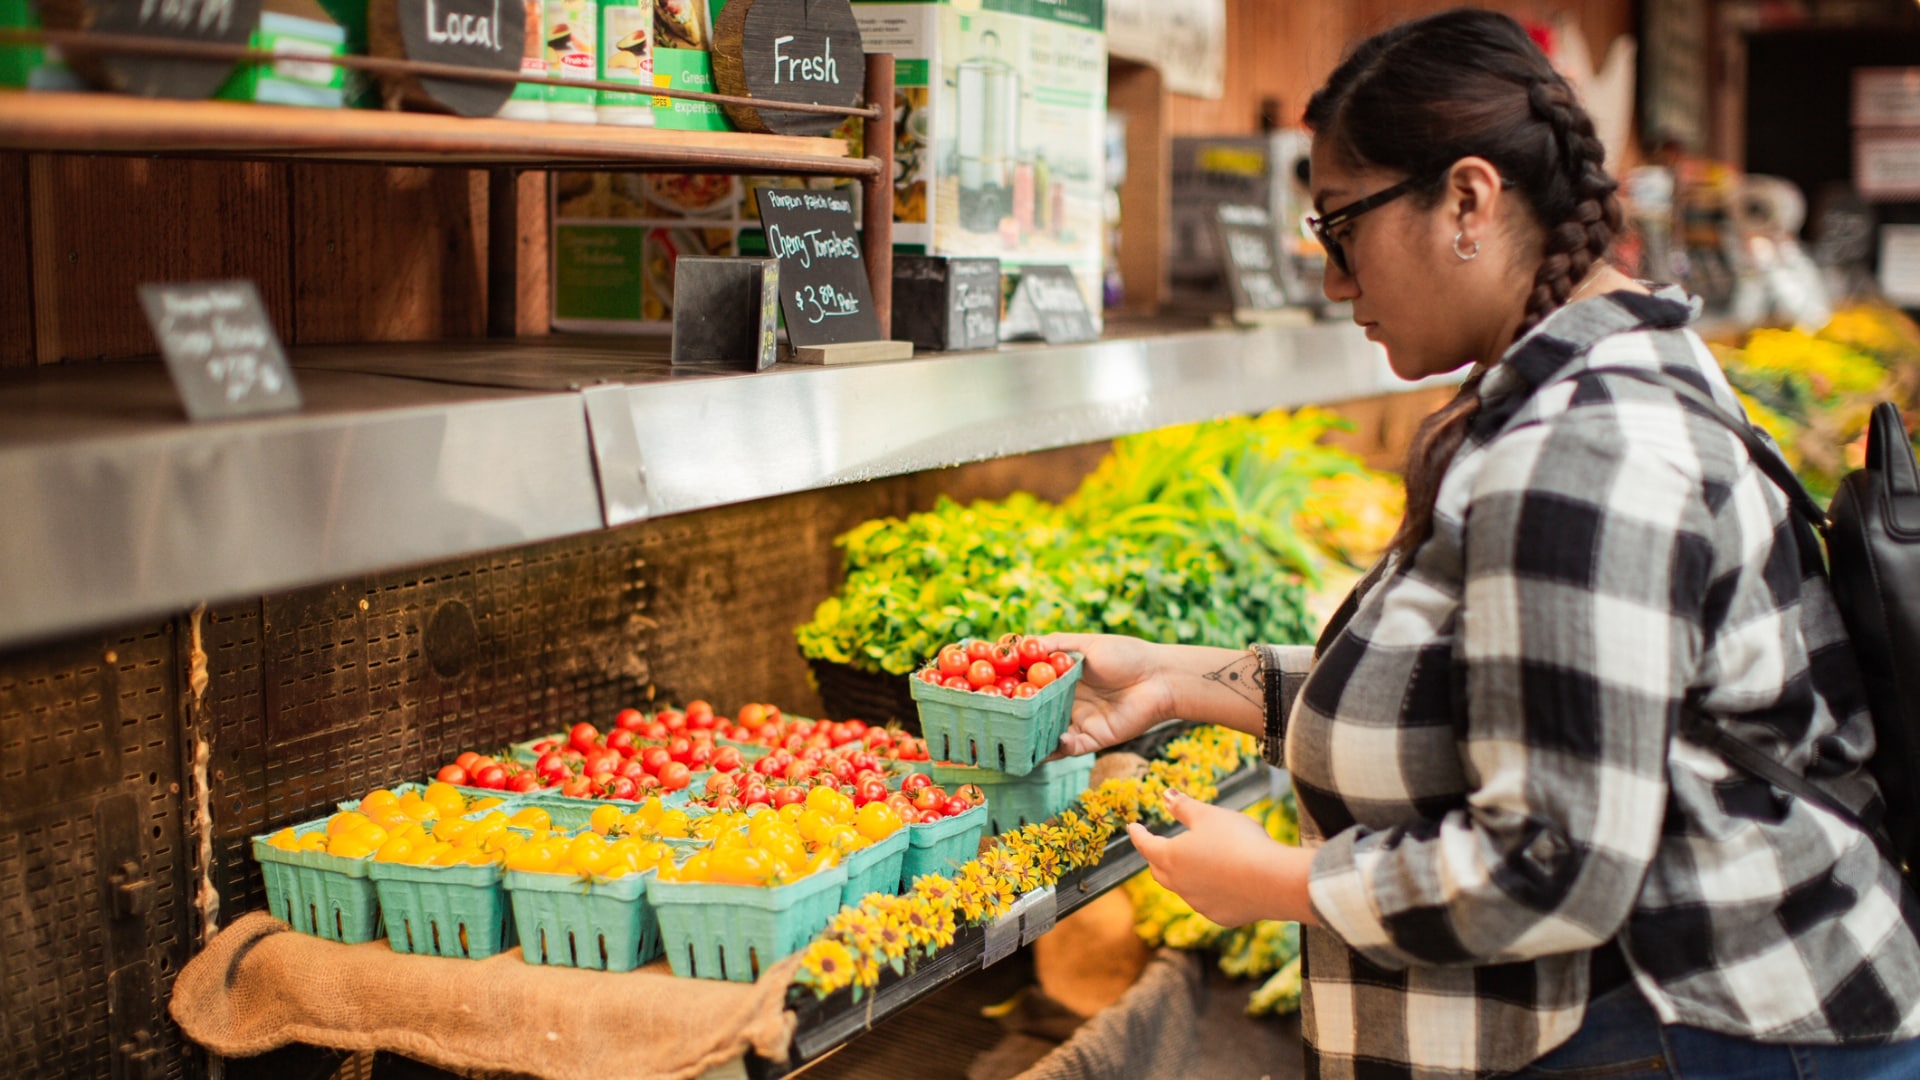 Pregnant Hispanic woman wearing a black and white checkerboard shirt, jeans, glasses with her hair braided. She is holding a carton of cherry tomatoes from the produce section at a local farm store.